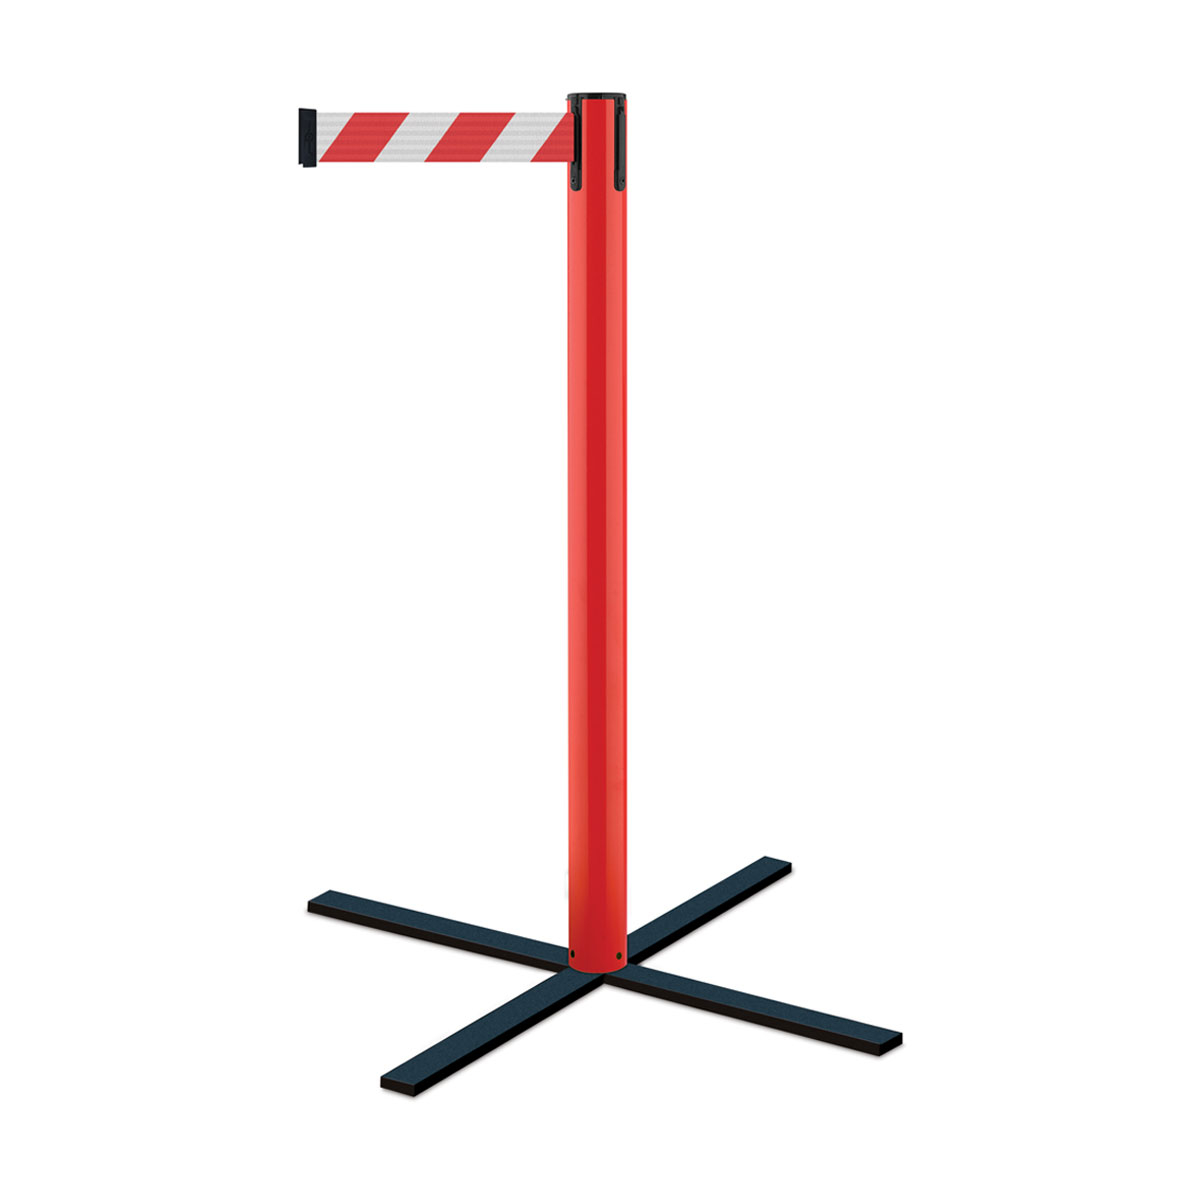 Tensabarrier® Stowaway Portable Safety Barrier Single Post (Bag Not Included) - Cast Iron Feet That Fold Flat Making it Easy To Store When Not in Use